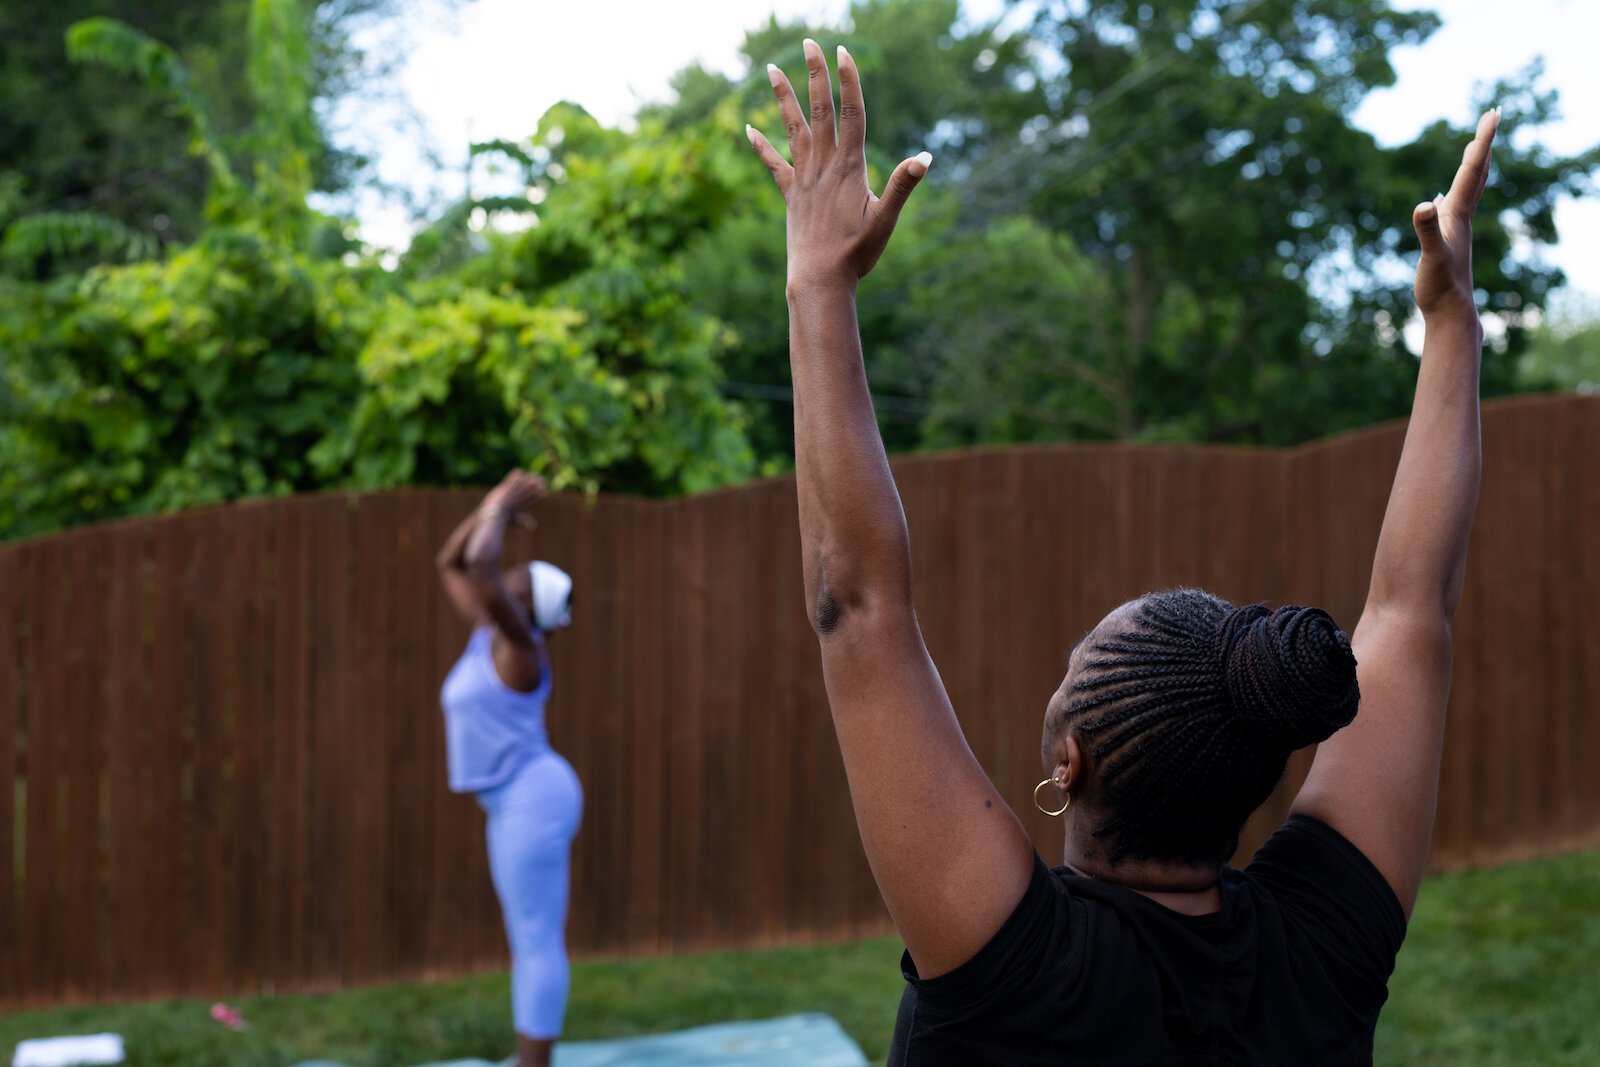 Diane Rogers, left, a longtime resident and current President of the Oxford Community Association, leads a yoga class in her backyard for her neighborhood and community drop-ins.